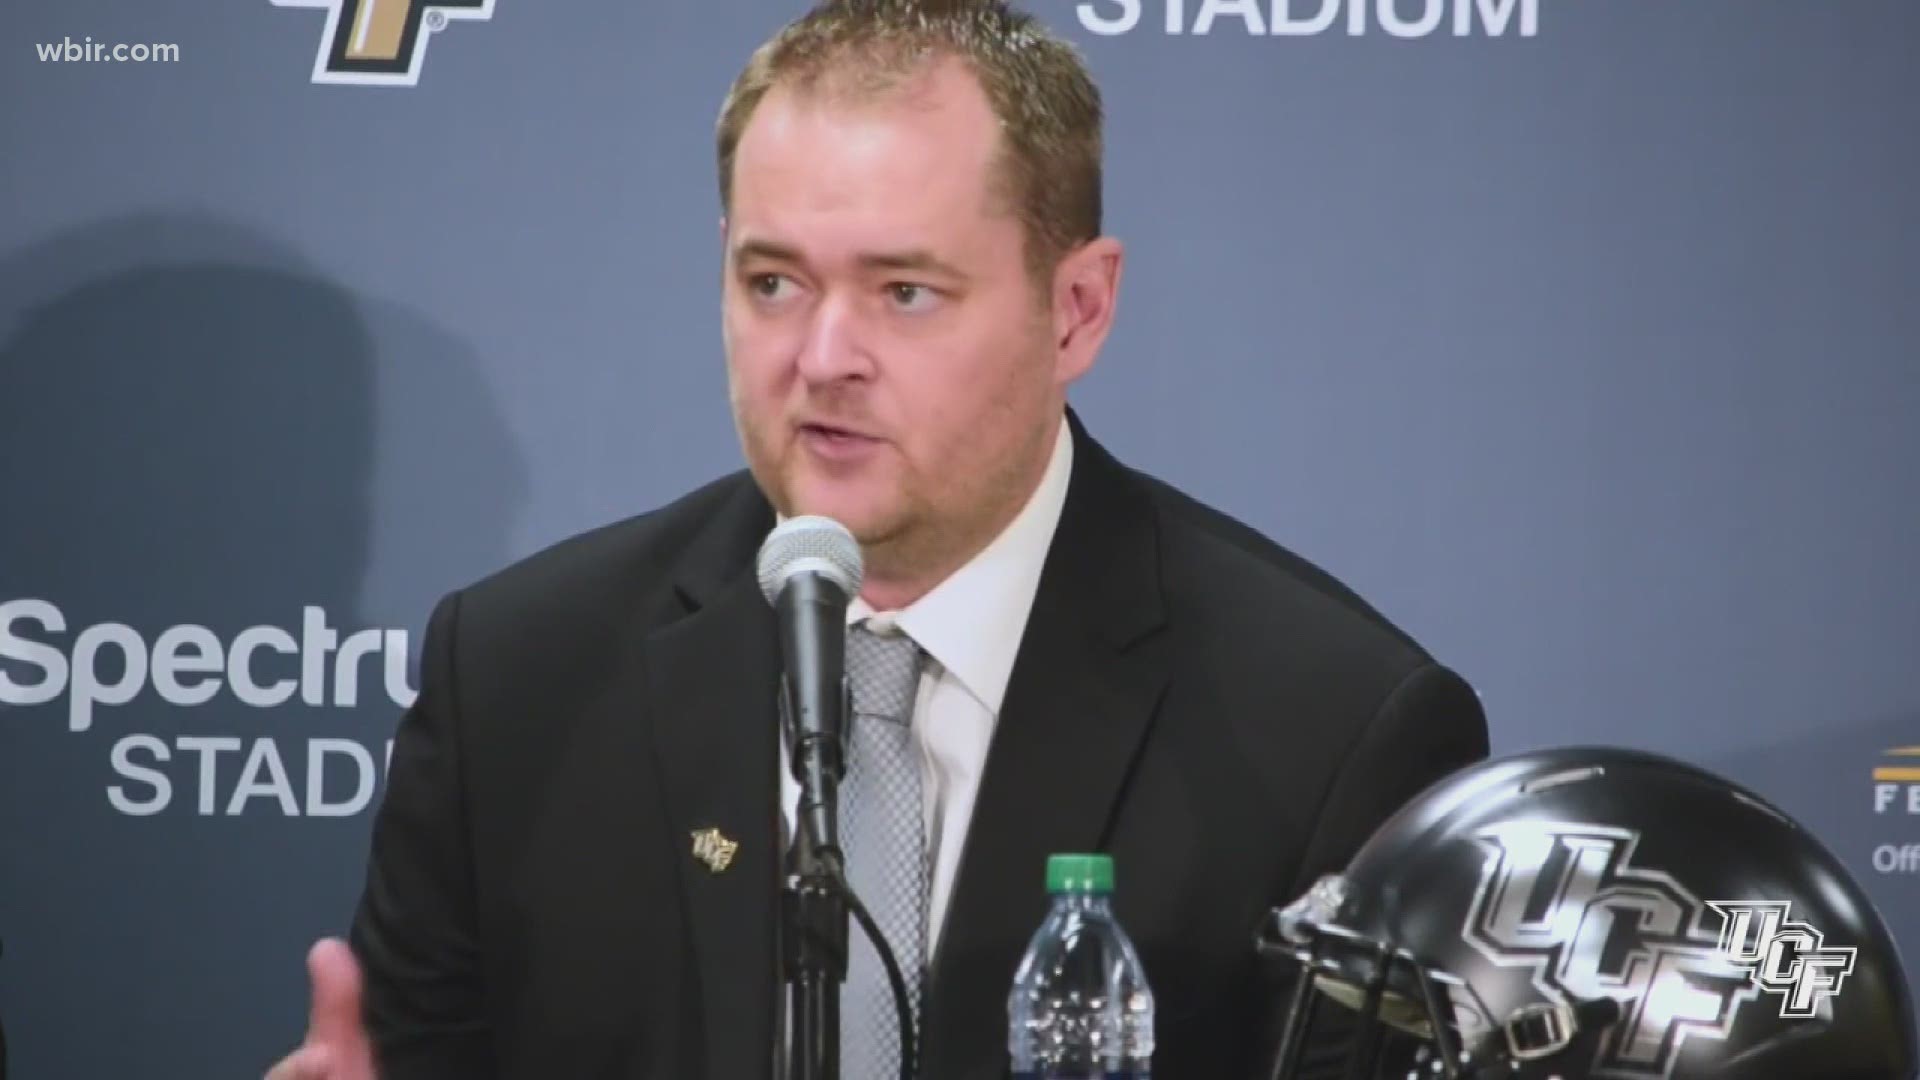 Heupel will be the 27th head coach of the Tennessee football program, the University announced Wednesday.